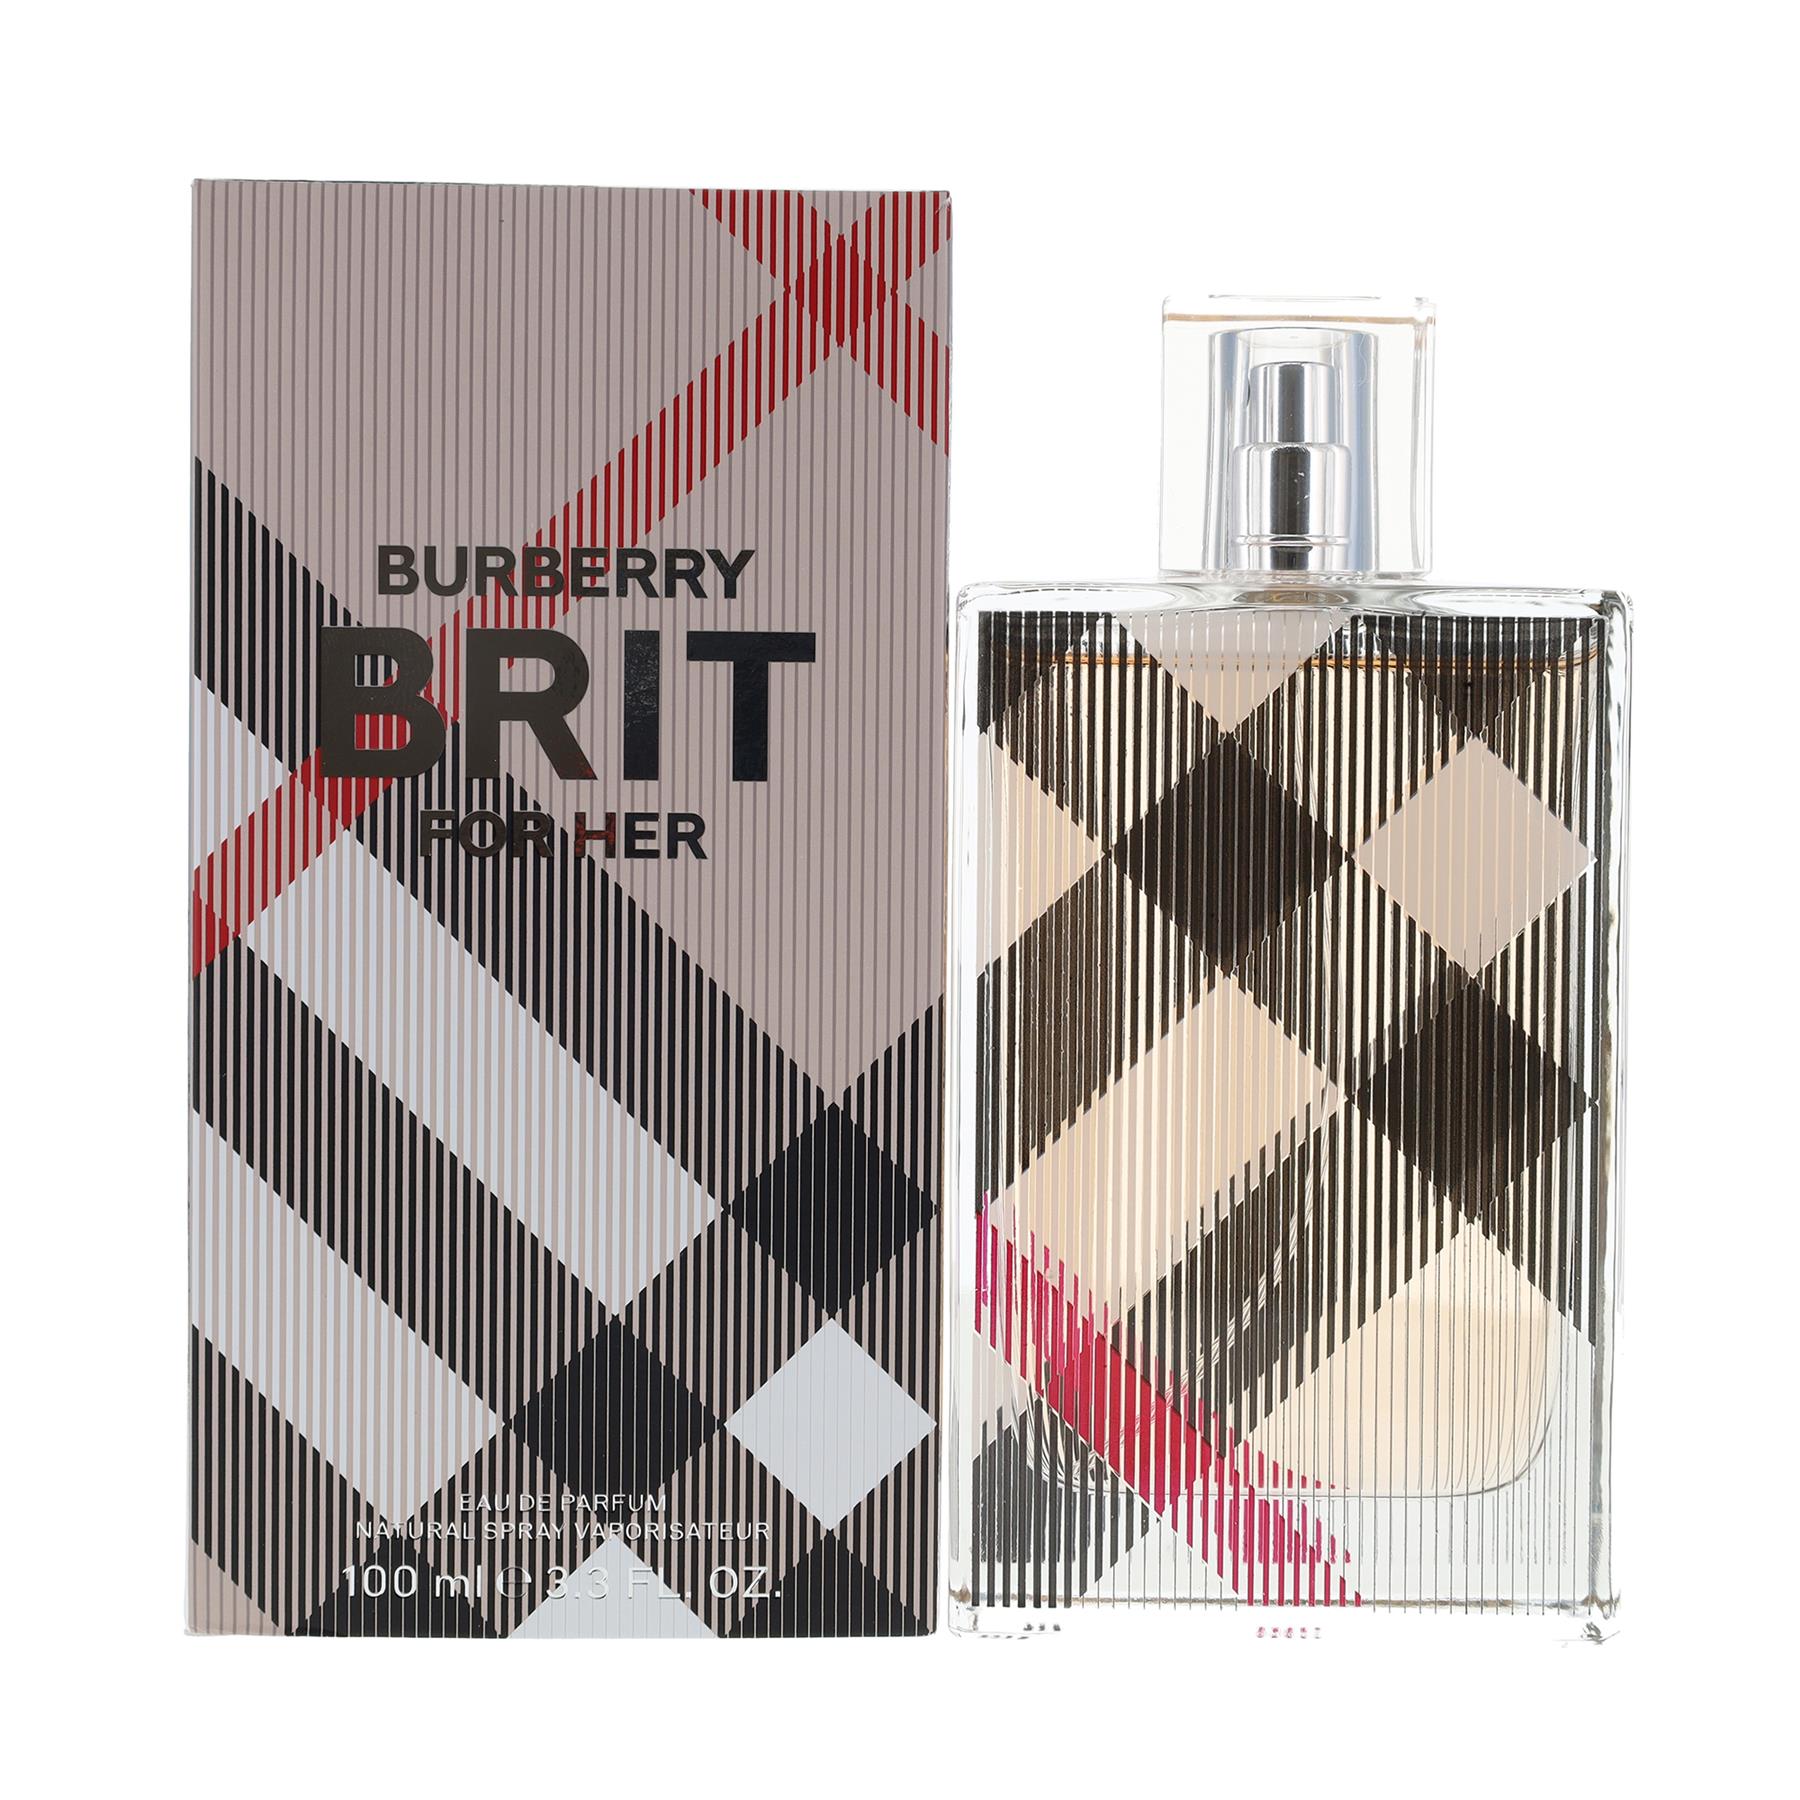 Burberry Brit For Her 100ml Eau de Parfum Spray for Her from Perfume Plus Direct